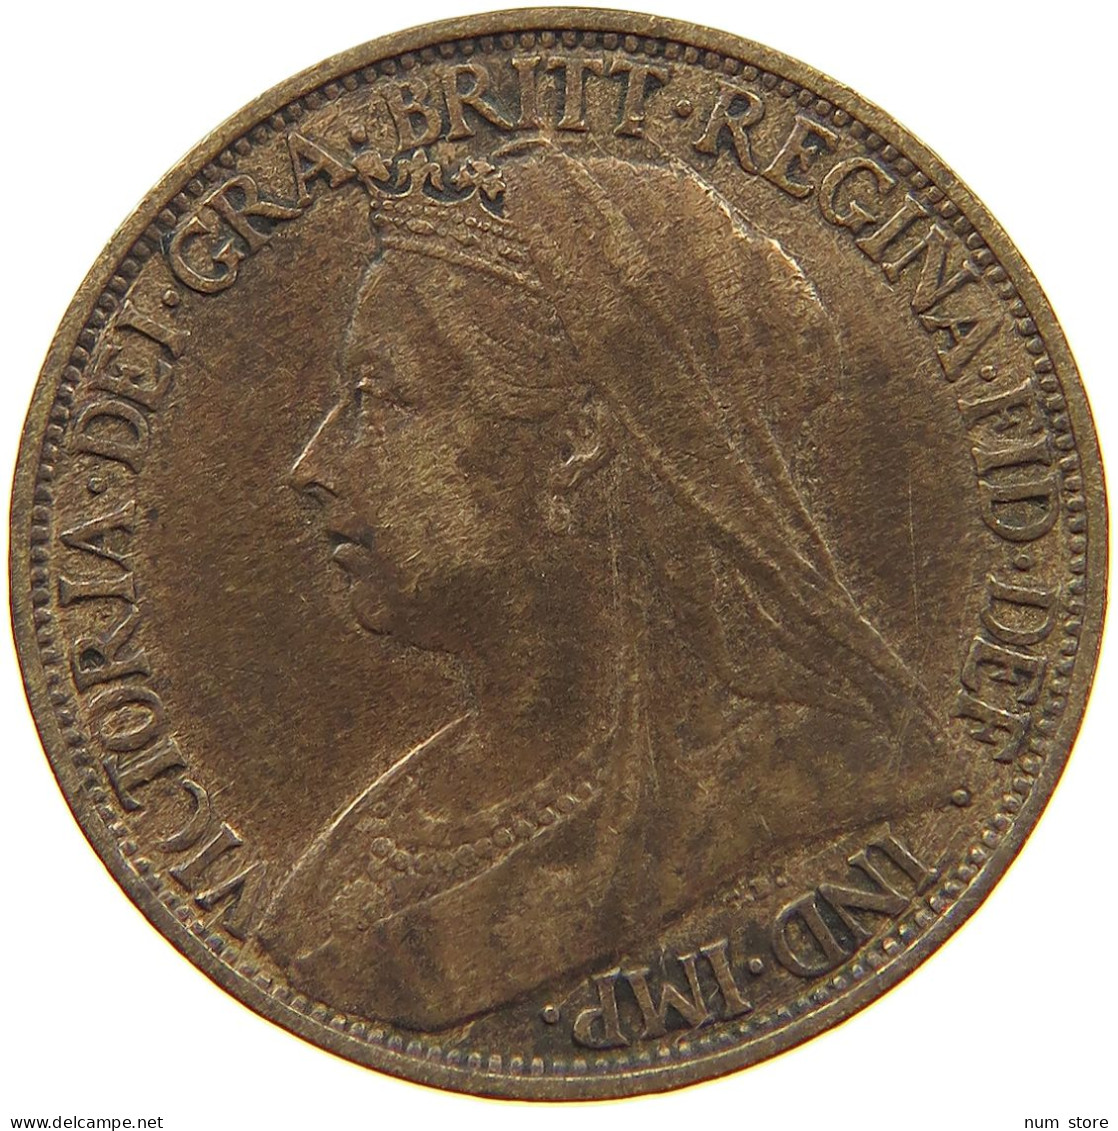 GREAT BRITAIN FARTHING 1901 Victoria 1837-1901 #a011 0919 - B. 1 Farthing